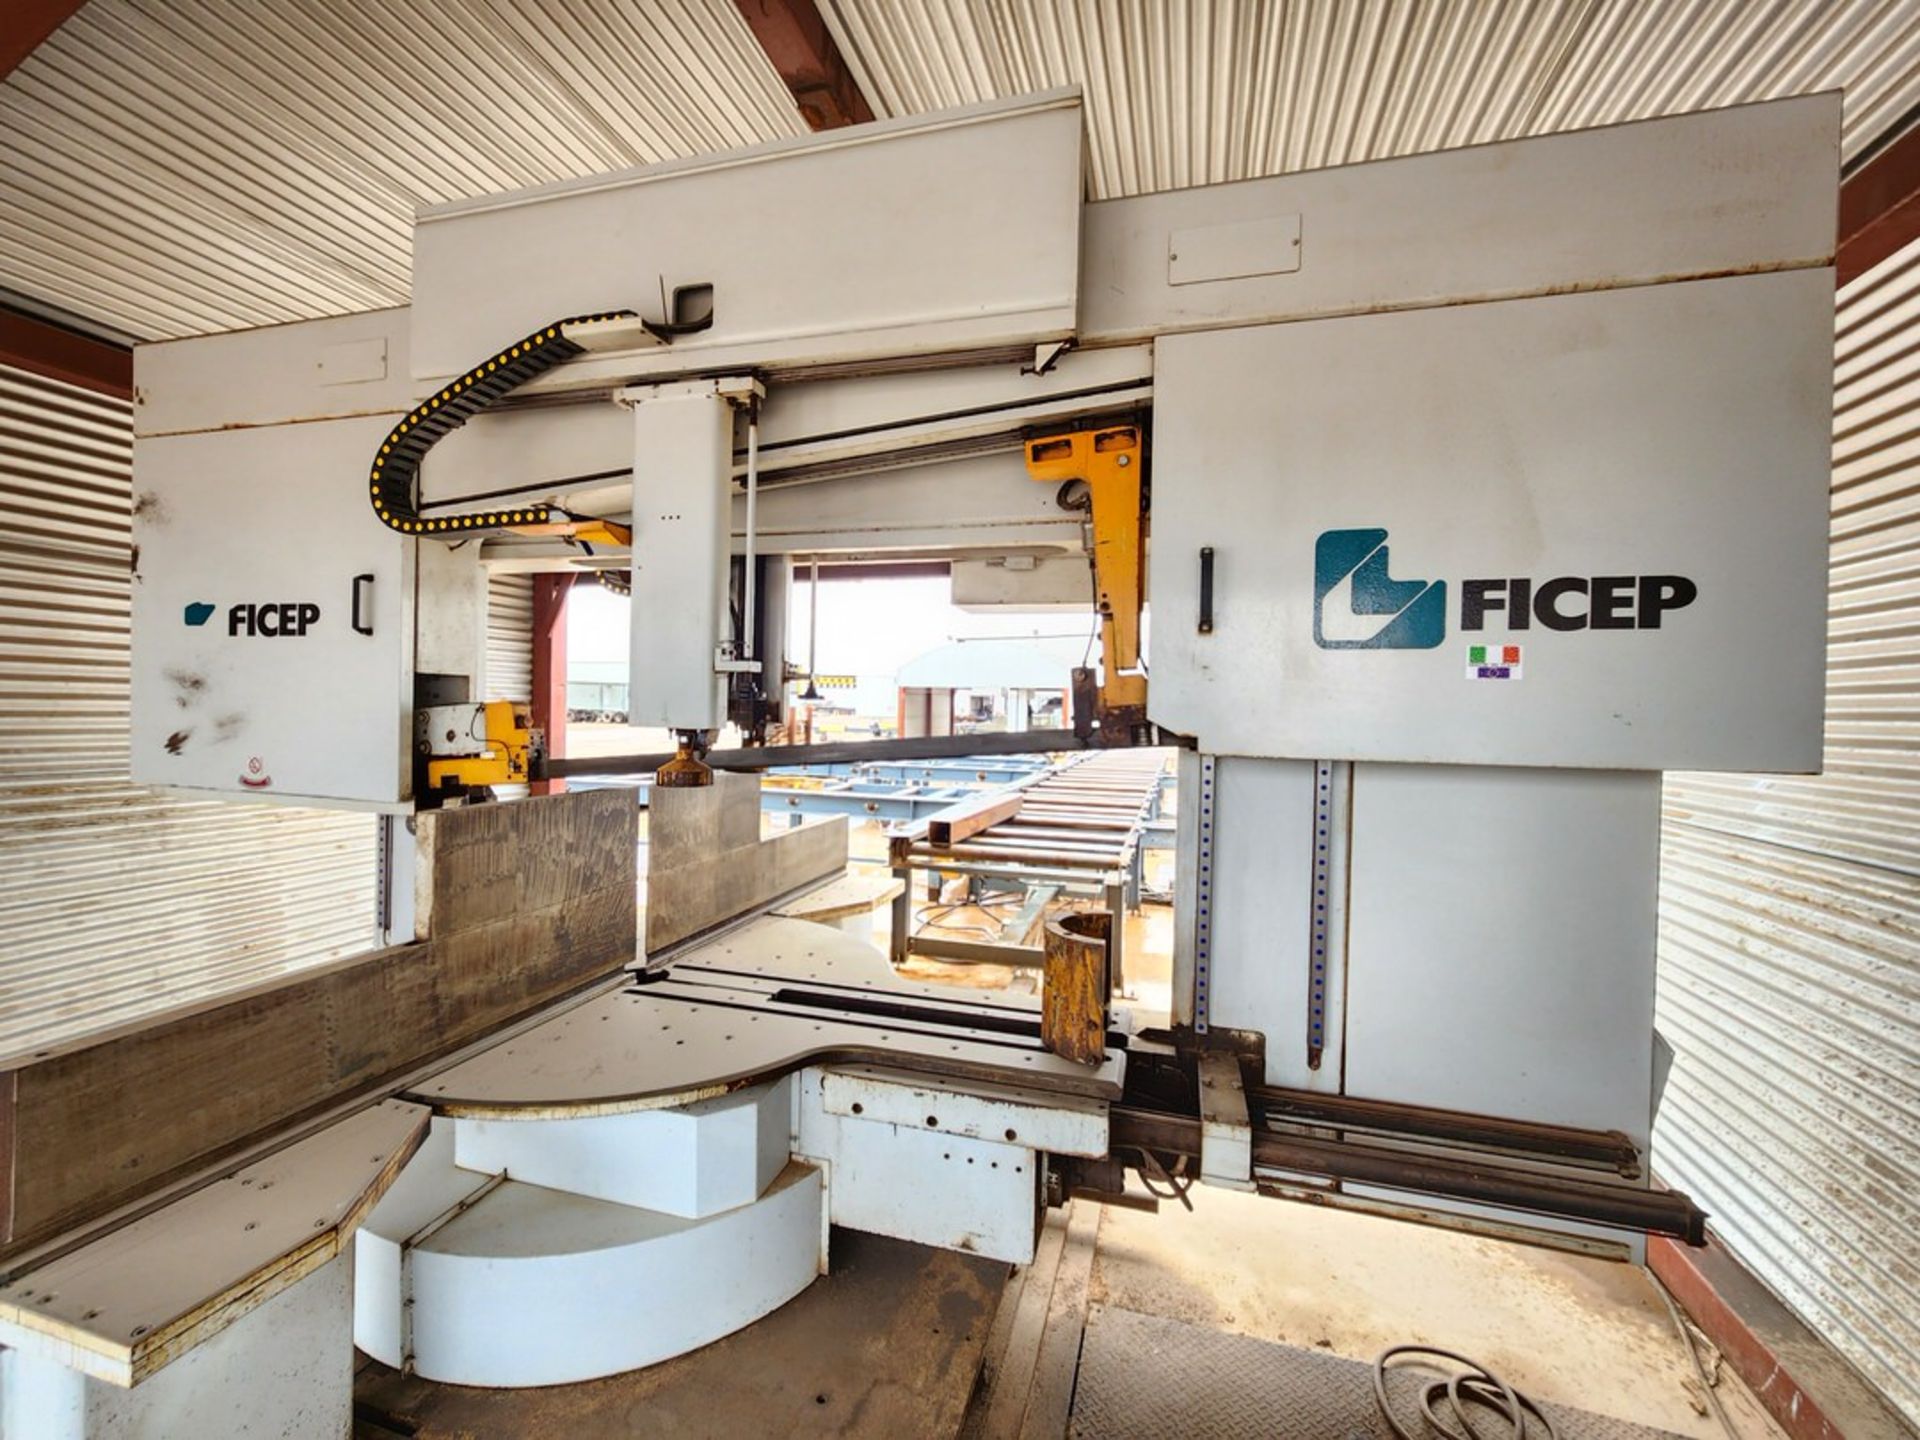 2020 Ficep K126 Mitering Saw Line W/ Ficep Controller; W/ Ele Cabinet; (With infeed conveyor) - Image 11 of 18